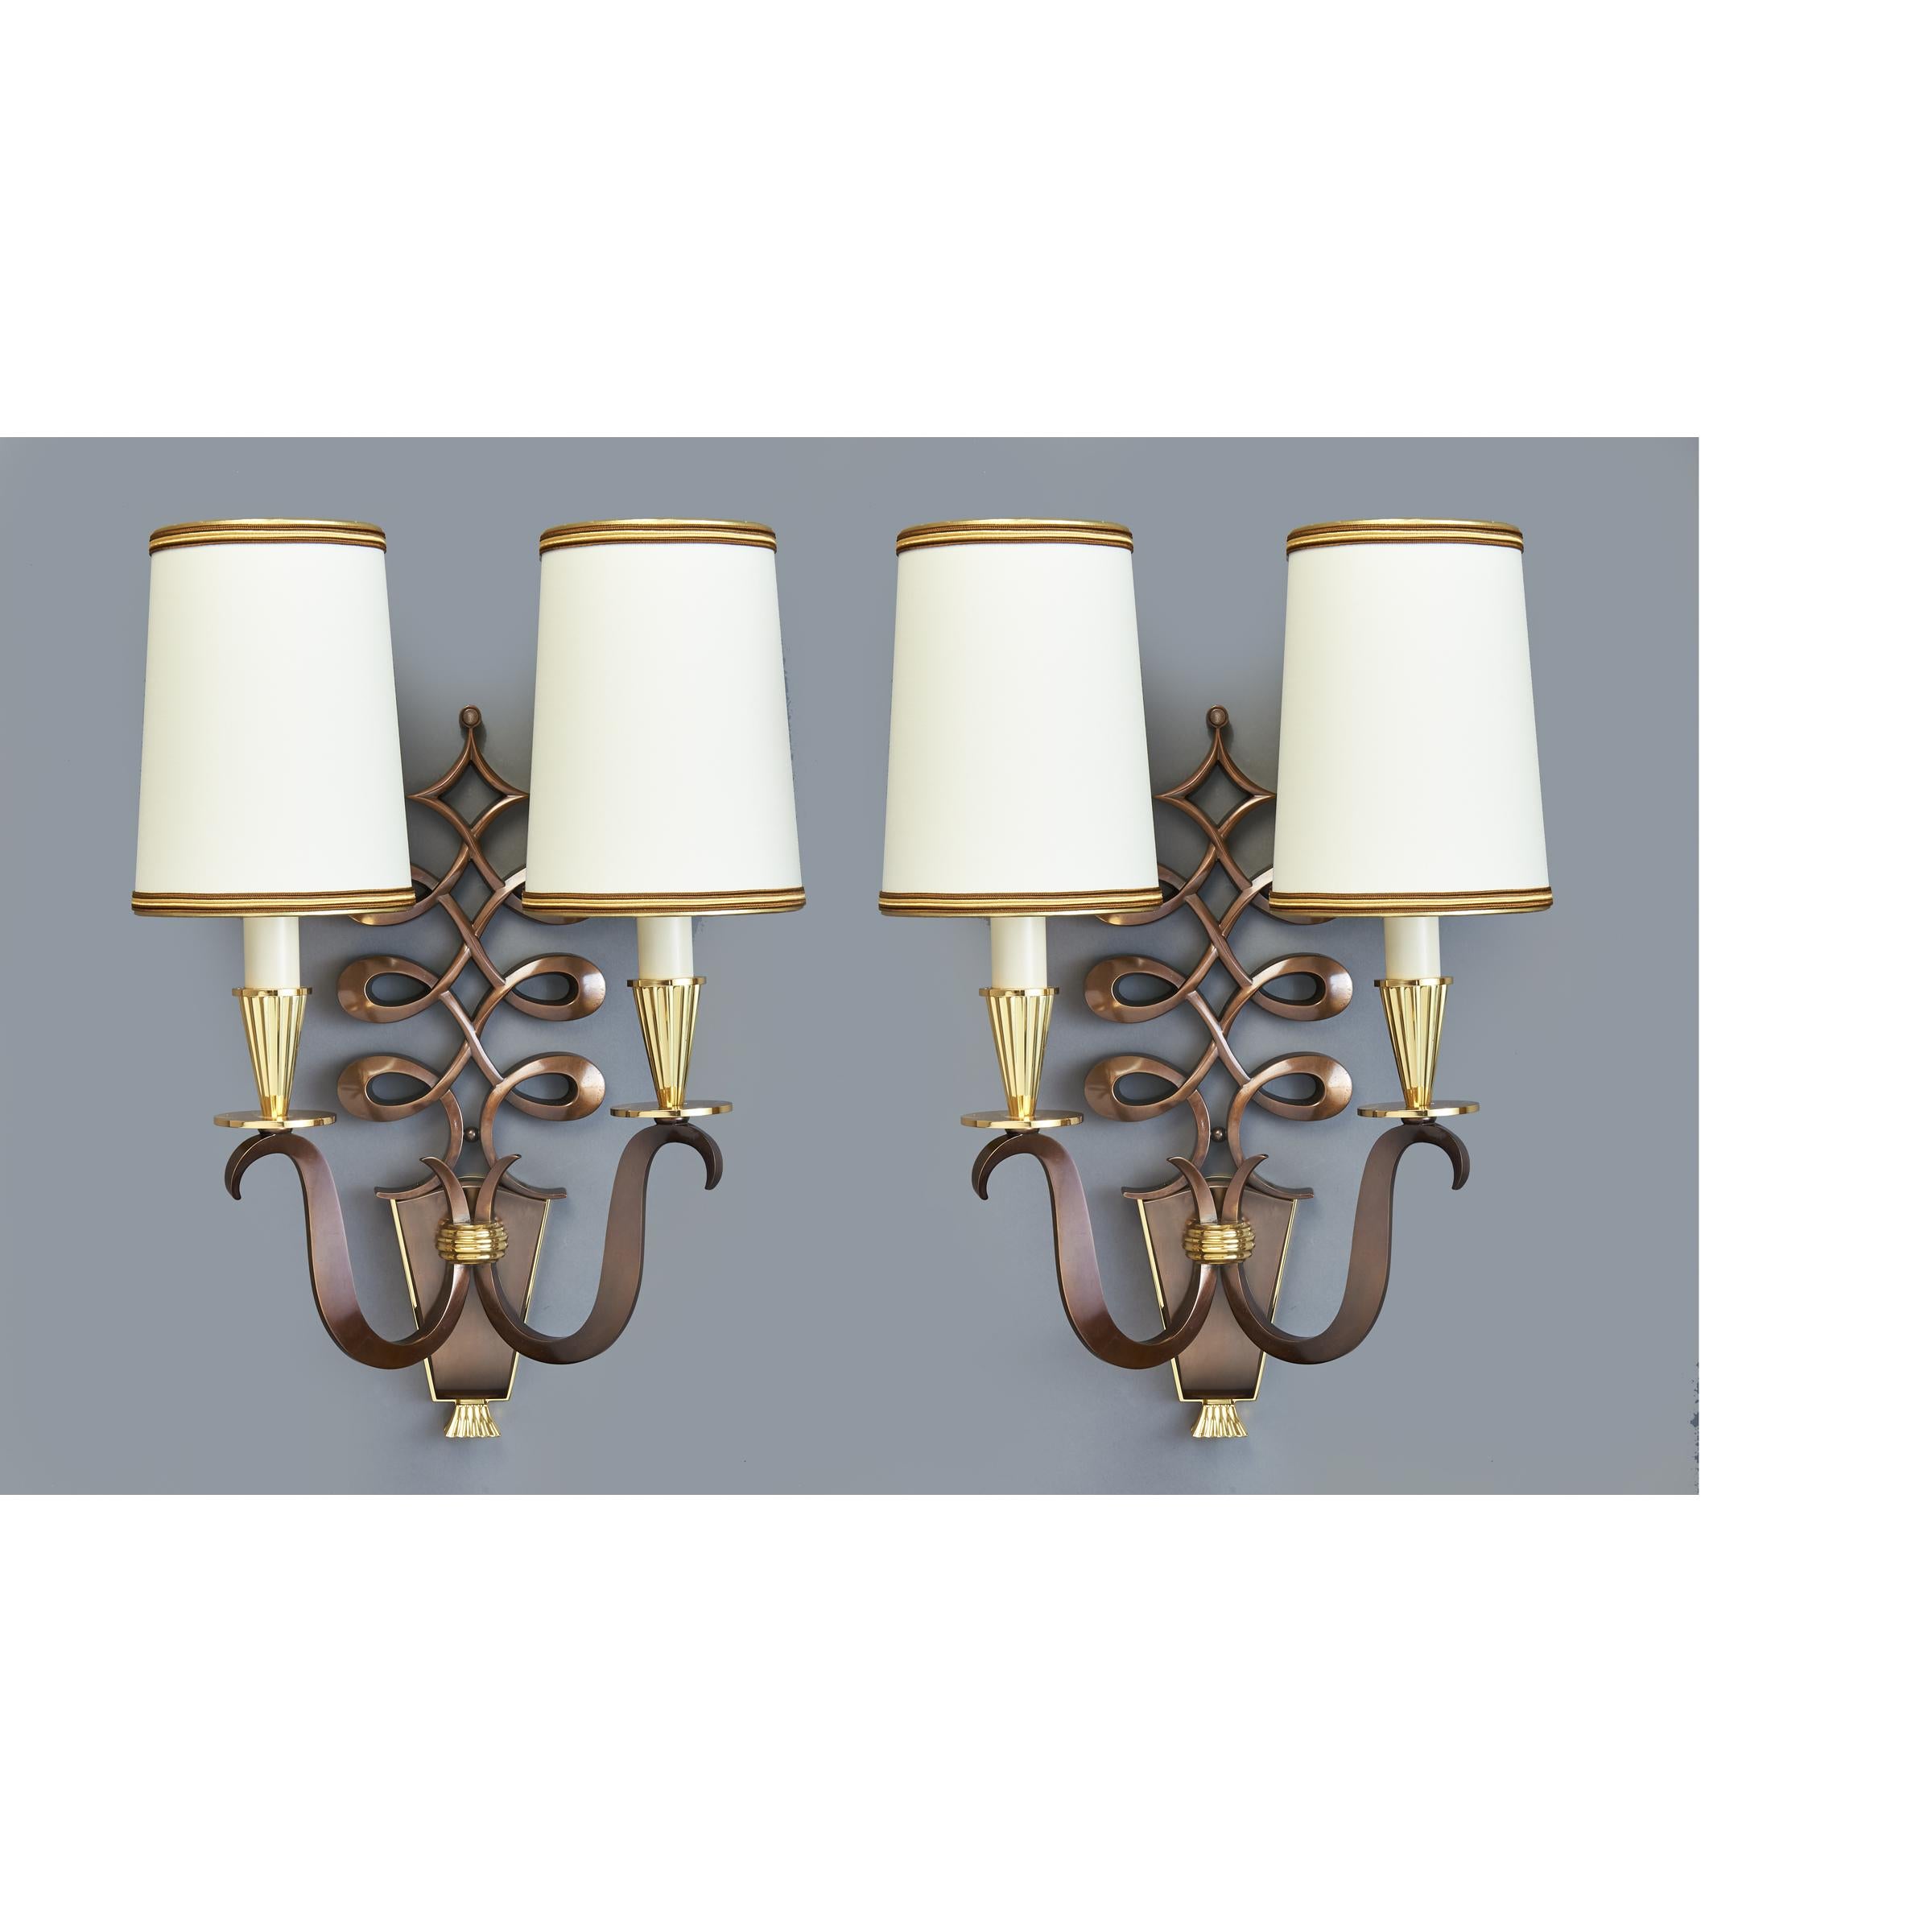 Genet et Michon
Philippe Genet ( b.1882 ) et Lucien Michon, ( 1887-1963 )
Beautifully cast pair of sconces with elaborate scroll motif and elegantly turned arms in oxidized sculptural bronze with polished bronze highlights.
France, circa